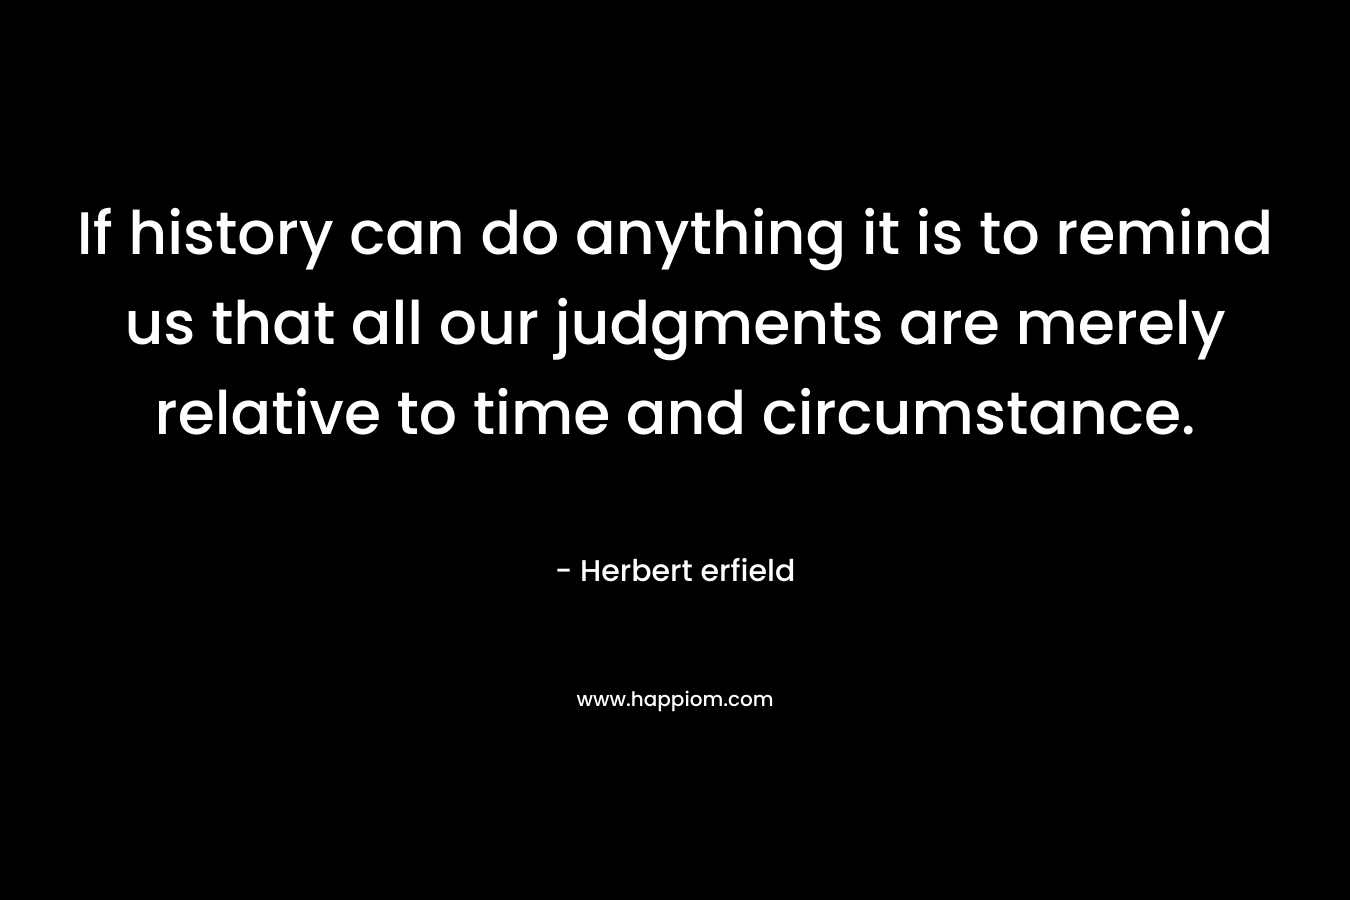 If history can do anything it is to remind us that all our judgments are merely relative to time and circumstance. – Herbert erfield